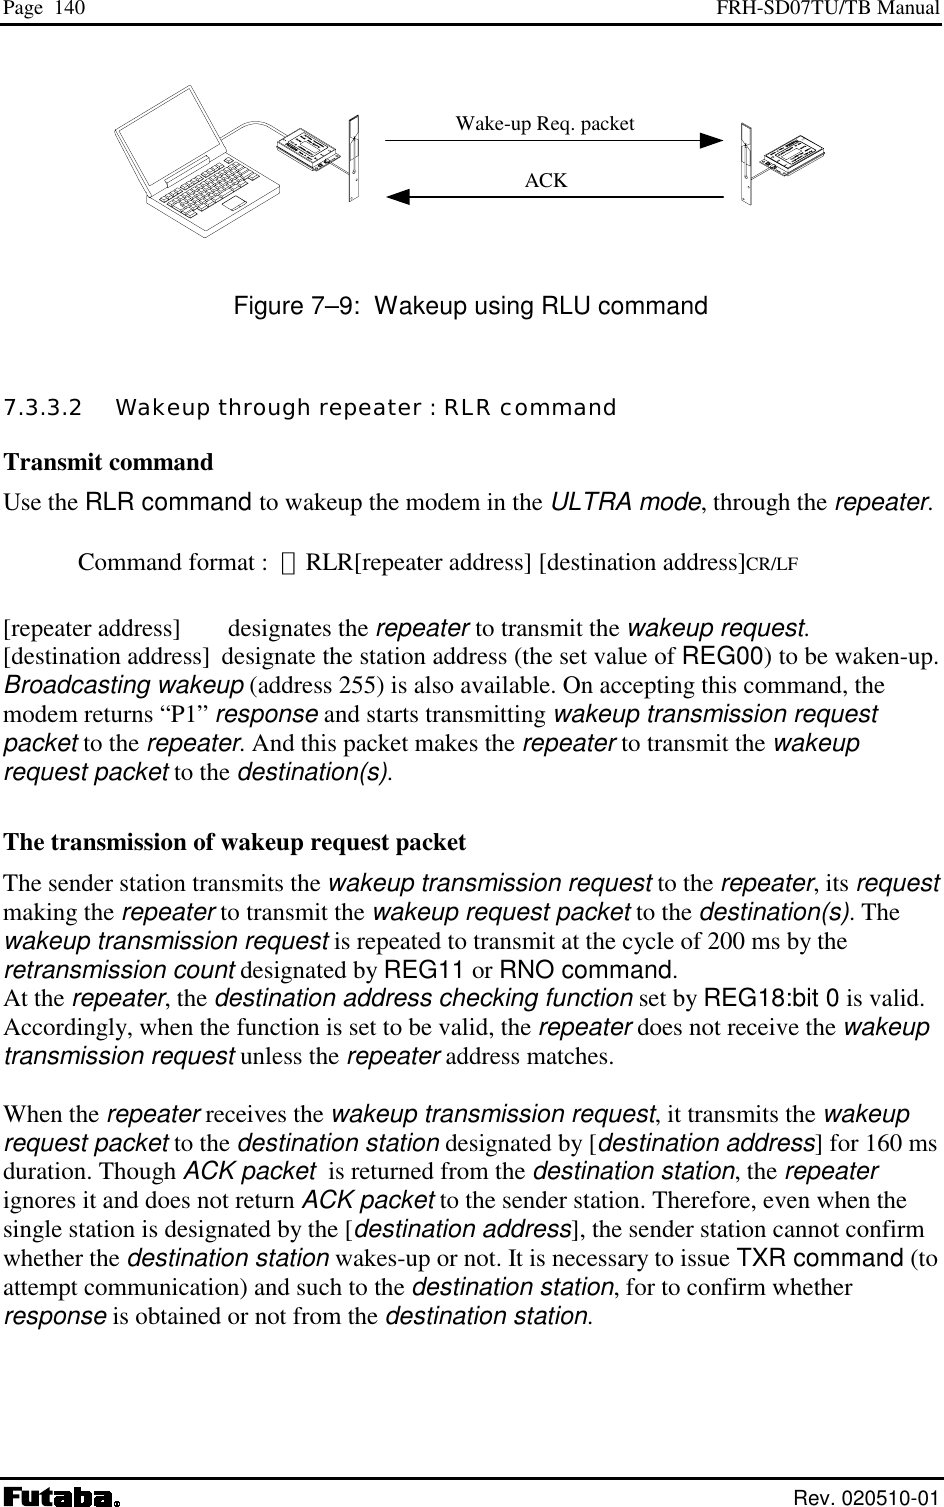 Page  140  FRH-SD07TU/TB Manual  Rev. 020510-01                                                                Figure 7–9:  Wakeup using RLU command 7.3.3.2   Wakeup through repeater : RLR command Transmit command Use the RLR command to wakeup the modem in the ULTRA mode, through the repeater.  Command format :  ＠RLR[repeater address] [destination address]CR/LF  [repeater address]  designates the repeater to transmit the wakeup request. [destination address]  designate the station address (the set value of REG00) to be waken-up.  Broadcasting wakeup (address 255) is also available. On accepting this command, the modem returns “P1” response and starts transmitting wakeup transmission request packet to the repeater. And this packet makes the repeater to transmit the wakeup request packet to the destination(s).  The transmission of wakeup request packet The sender station transmits the wakeup transmission request to the repeater, its request making the repeater to transmit the wakeup request packet to the destination(s). The wakeup transmission request is repeated to transmit at the cycle of 200 ms by the retransmission count designated by REG11 or RNO command. At the repeater, the destination address checking function set by REG18:bit 0 is valid. Accordingly, when the function is set to be valid, the repeater does not receive the wakeup transmission request unless the repeater address matches.  When the repeater receives the wakeup transmission request, it transmits the wakeup request packet to the destination station designated by [destination address] for 160 ms duration. Though ACK packet  is returned from the destination station, the repeater ignores it and does not return ACK packet to the sender station. Therefore, even when the single station is designated by the [destination address], the sender station cannot confirm whether the destination station wakes-up or not. It is necessary to issue TXR command (to attempt communication) and such to the destination station, for to confirm whether response is obtained or not from the destination station.    Wake-up Req. packet ACK 